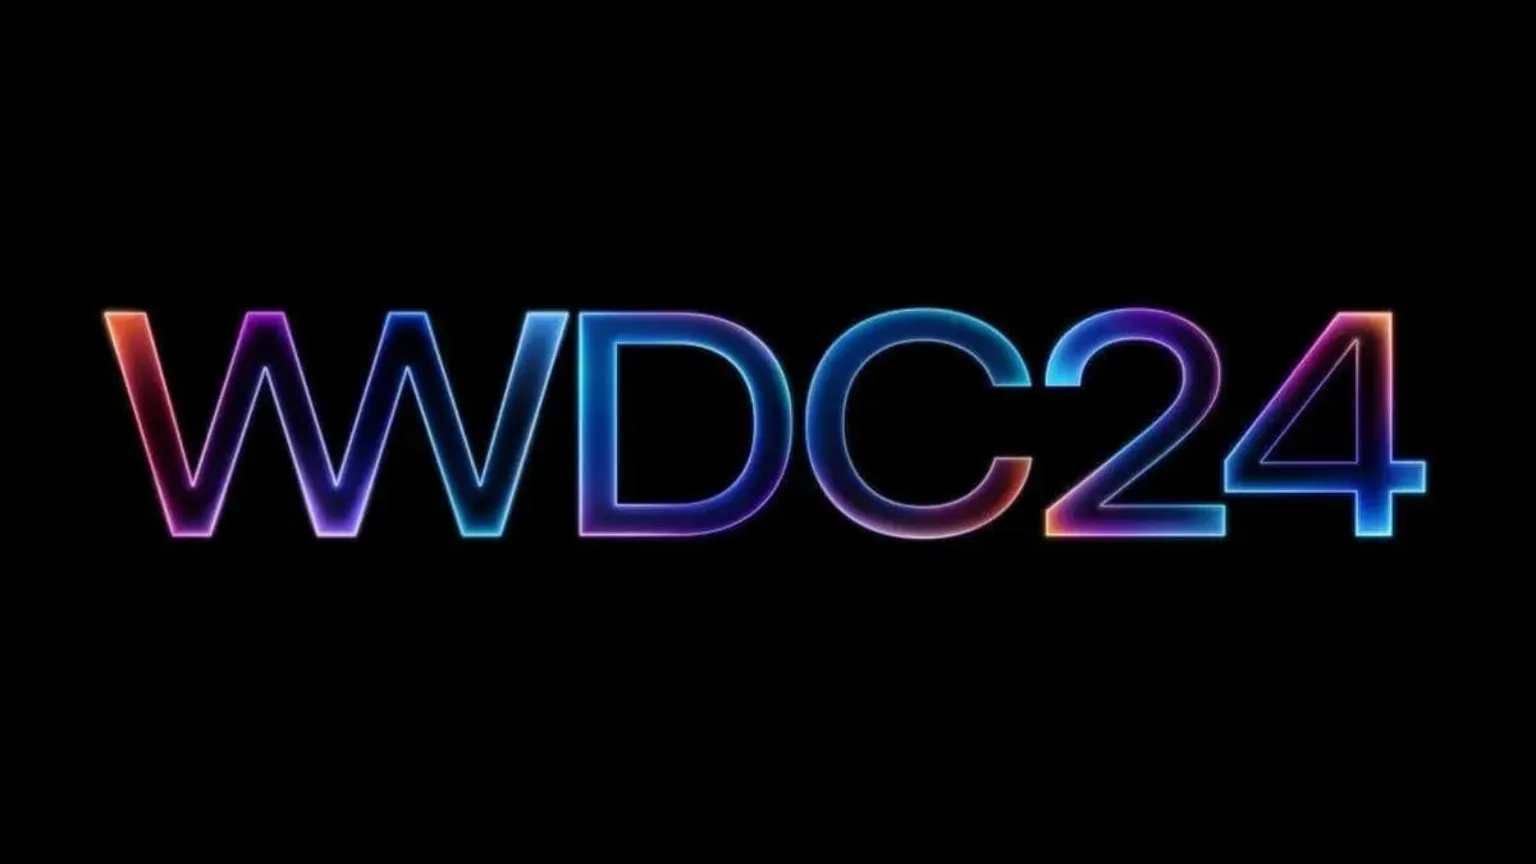 WWDC24: Apple Worldwide Developers Conference 2024 – Learn How You Can Become an iOS Developer!